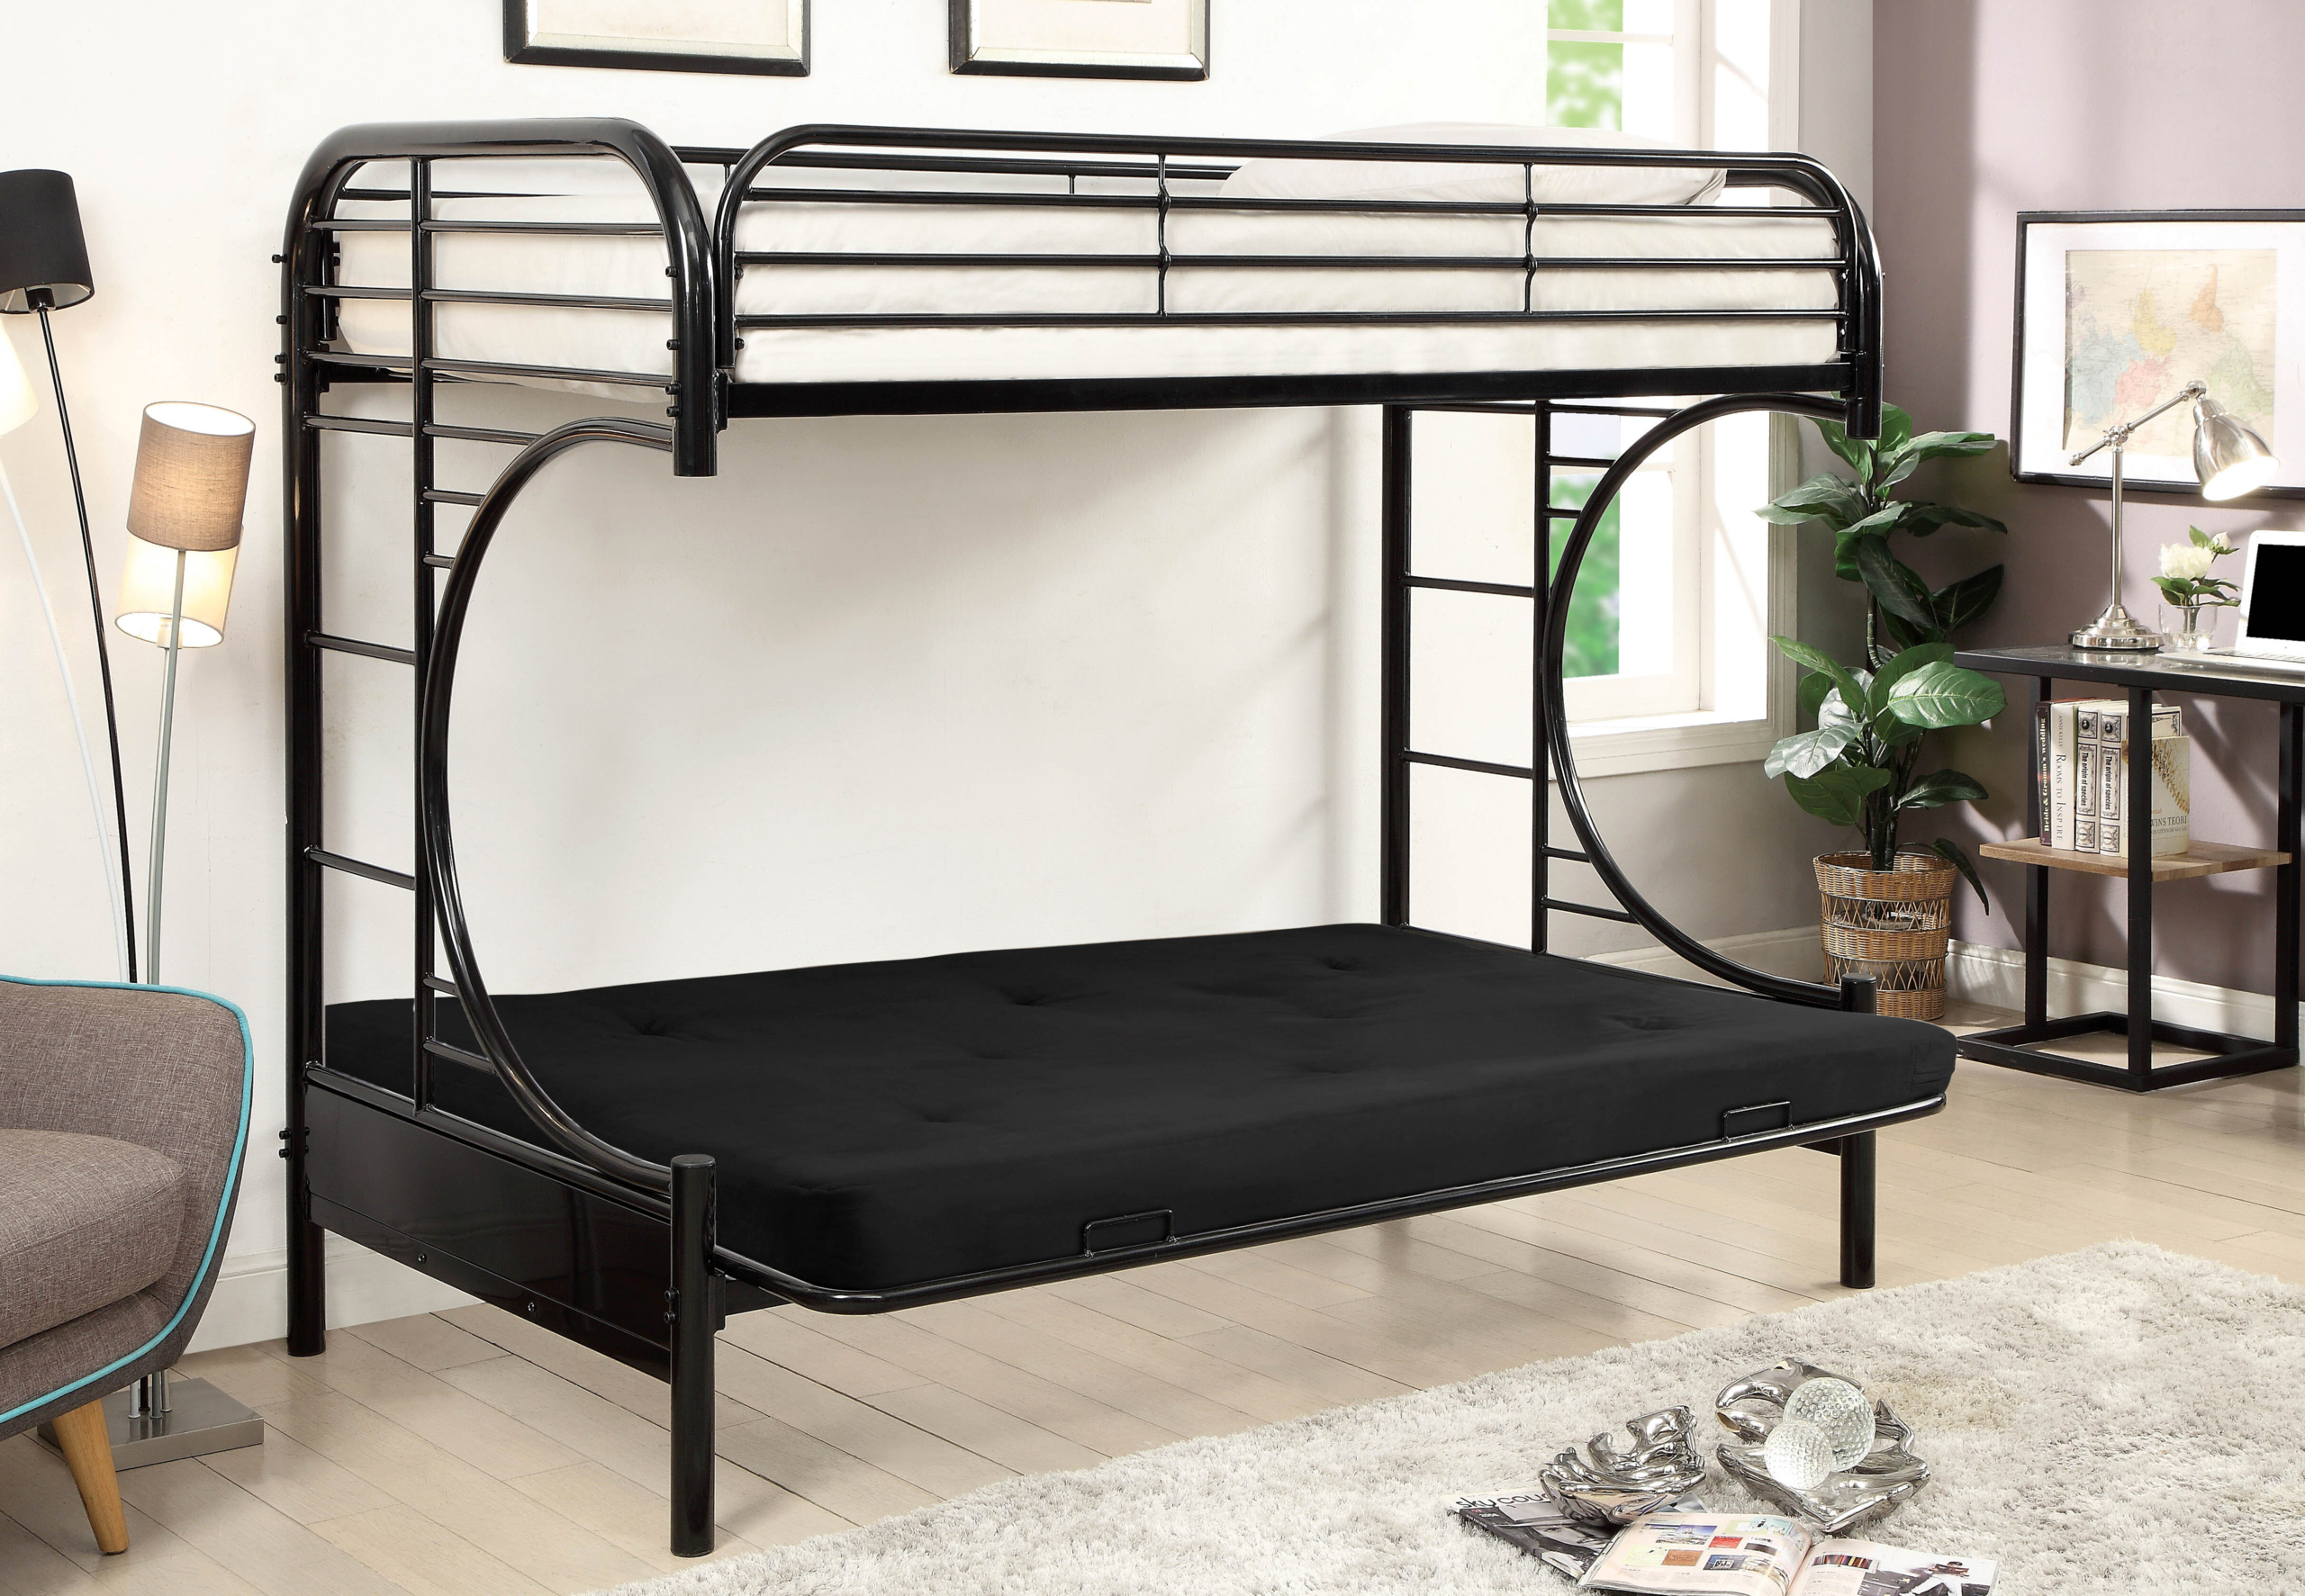 Futon Bed Bunk Limited Time Offer, Samba Full Full Futon Bunk Bed